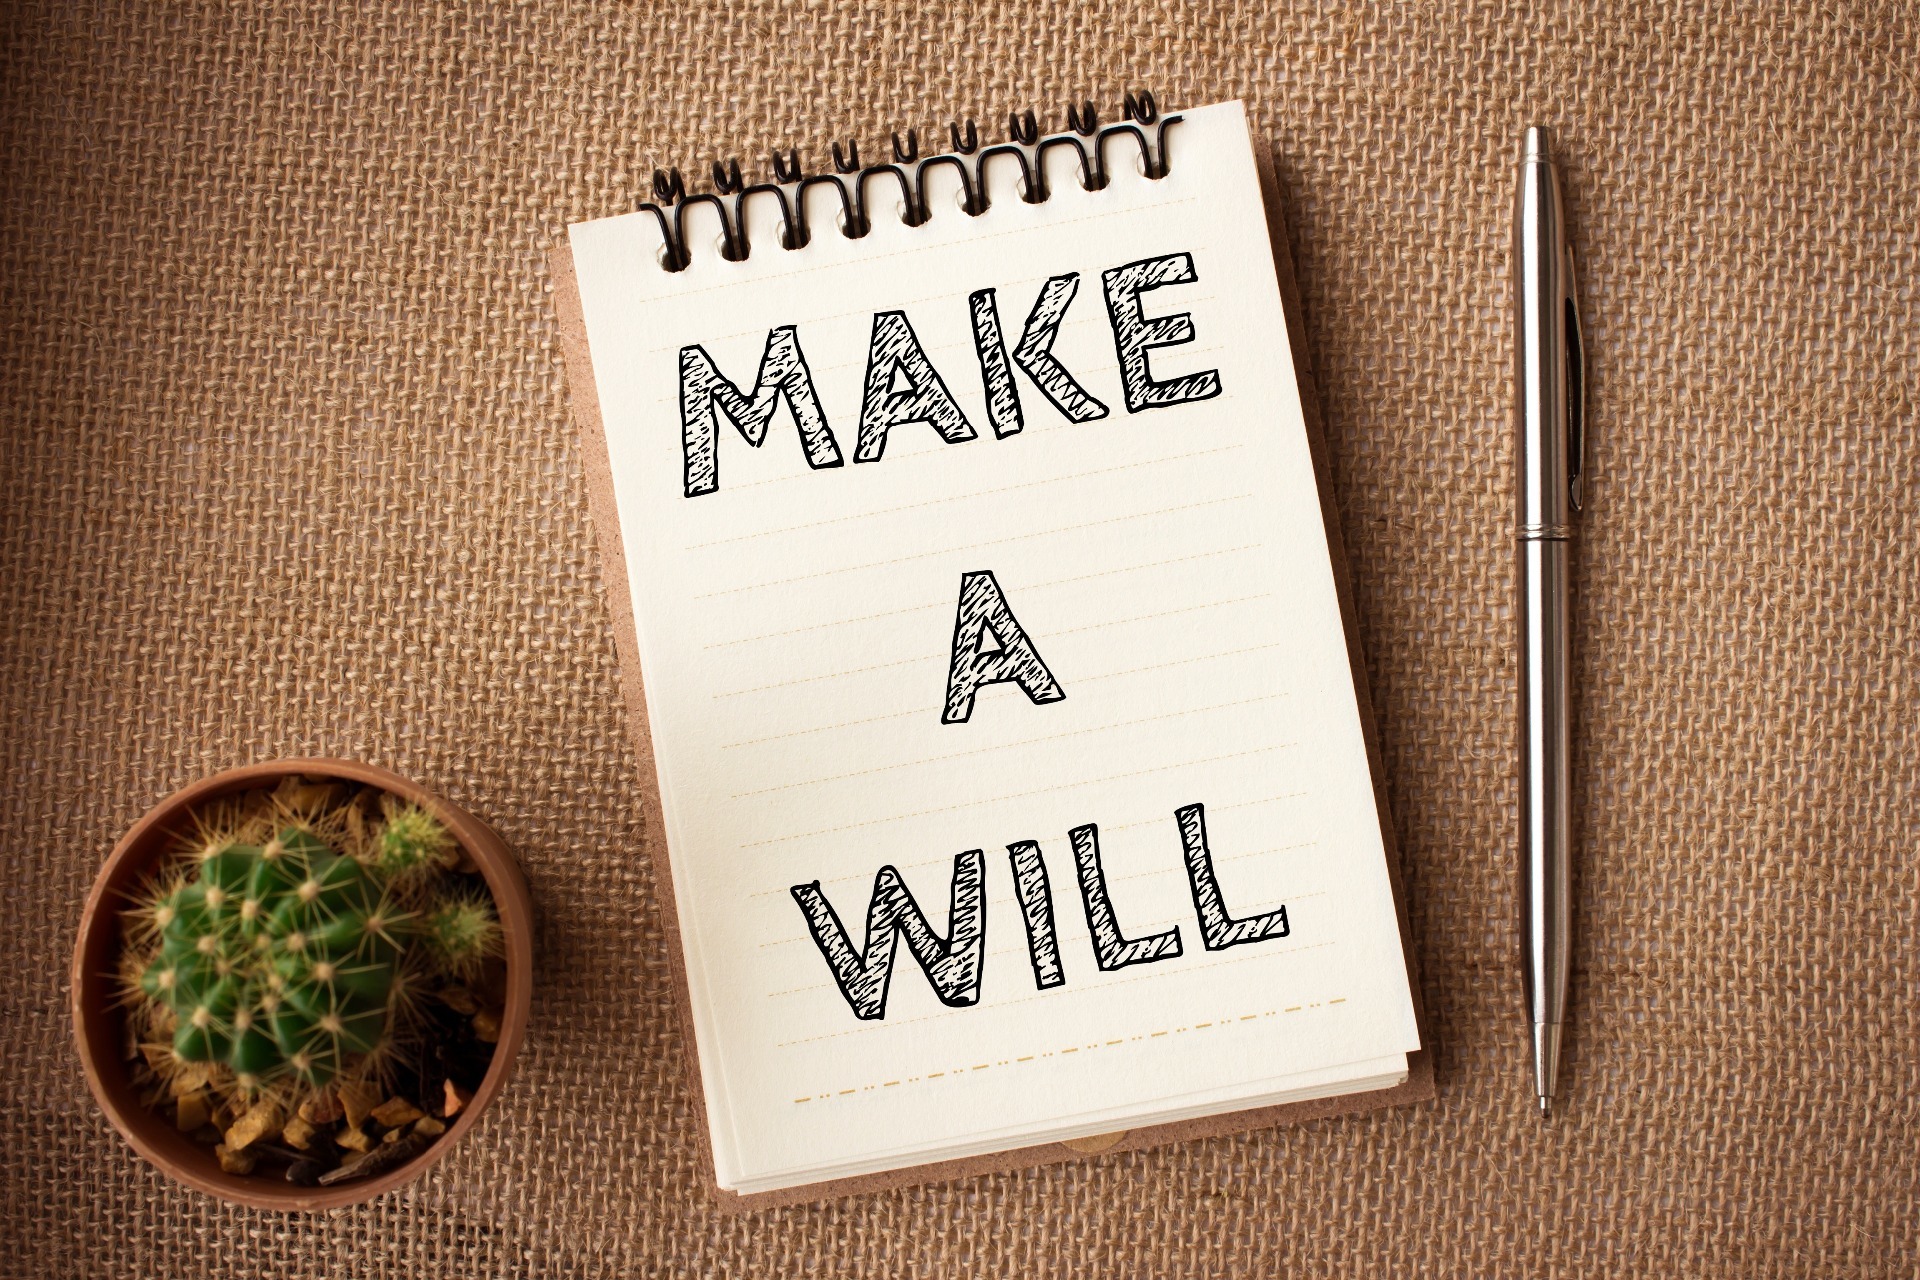 "Make a Will" written on a spiral-bound notepad, with a cactus plant and pen nearby; our Wills Solicitors in Preston can be contacted by completing the form overleaf.